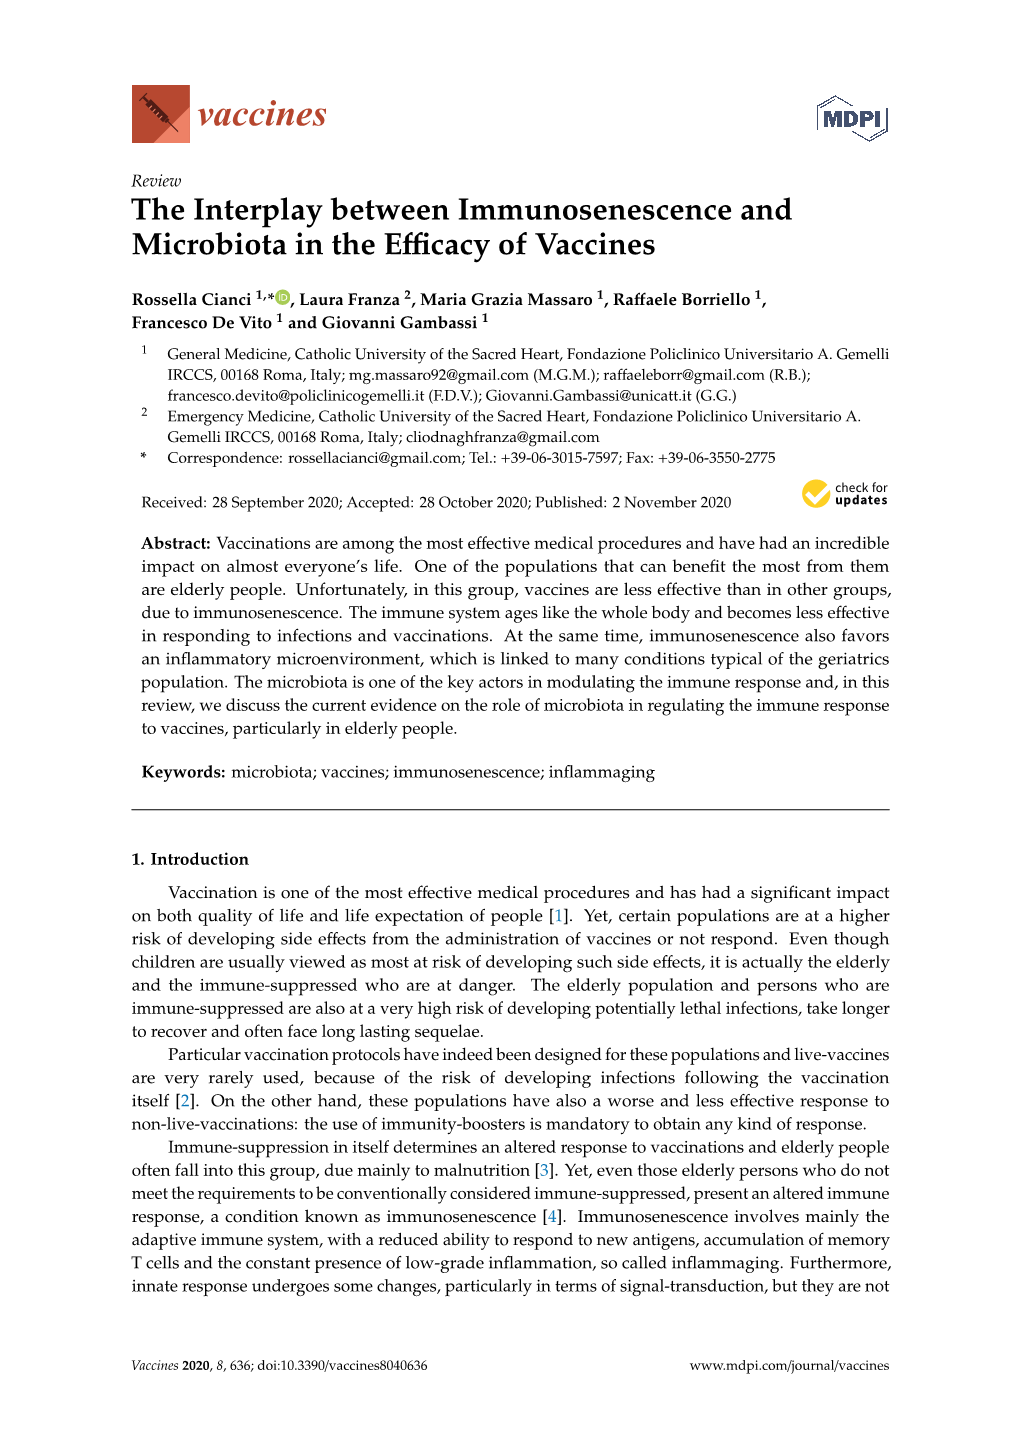 The Interplay Between Immunosenescence and Microbiota in the Eﬃcacy of Vaccines